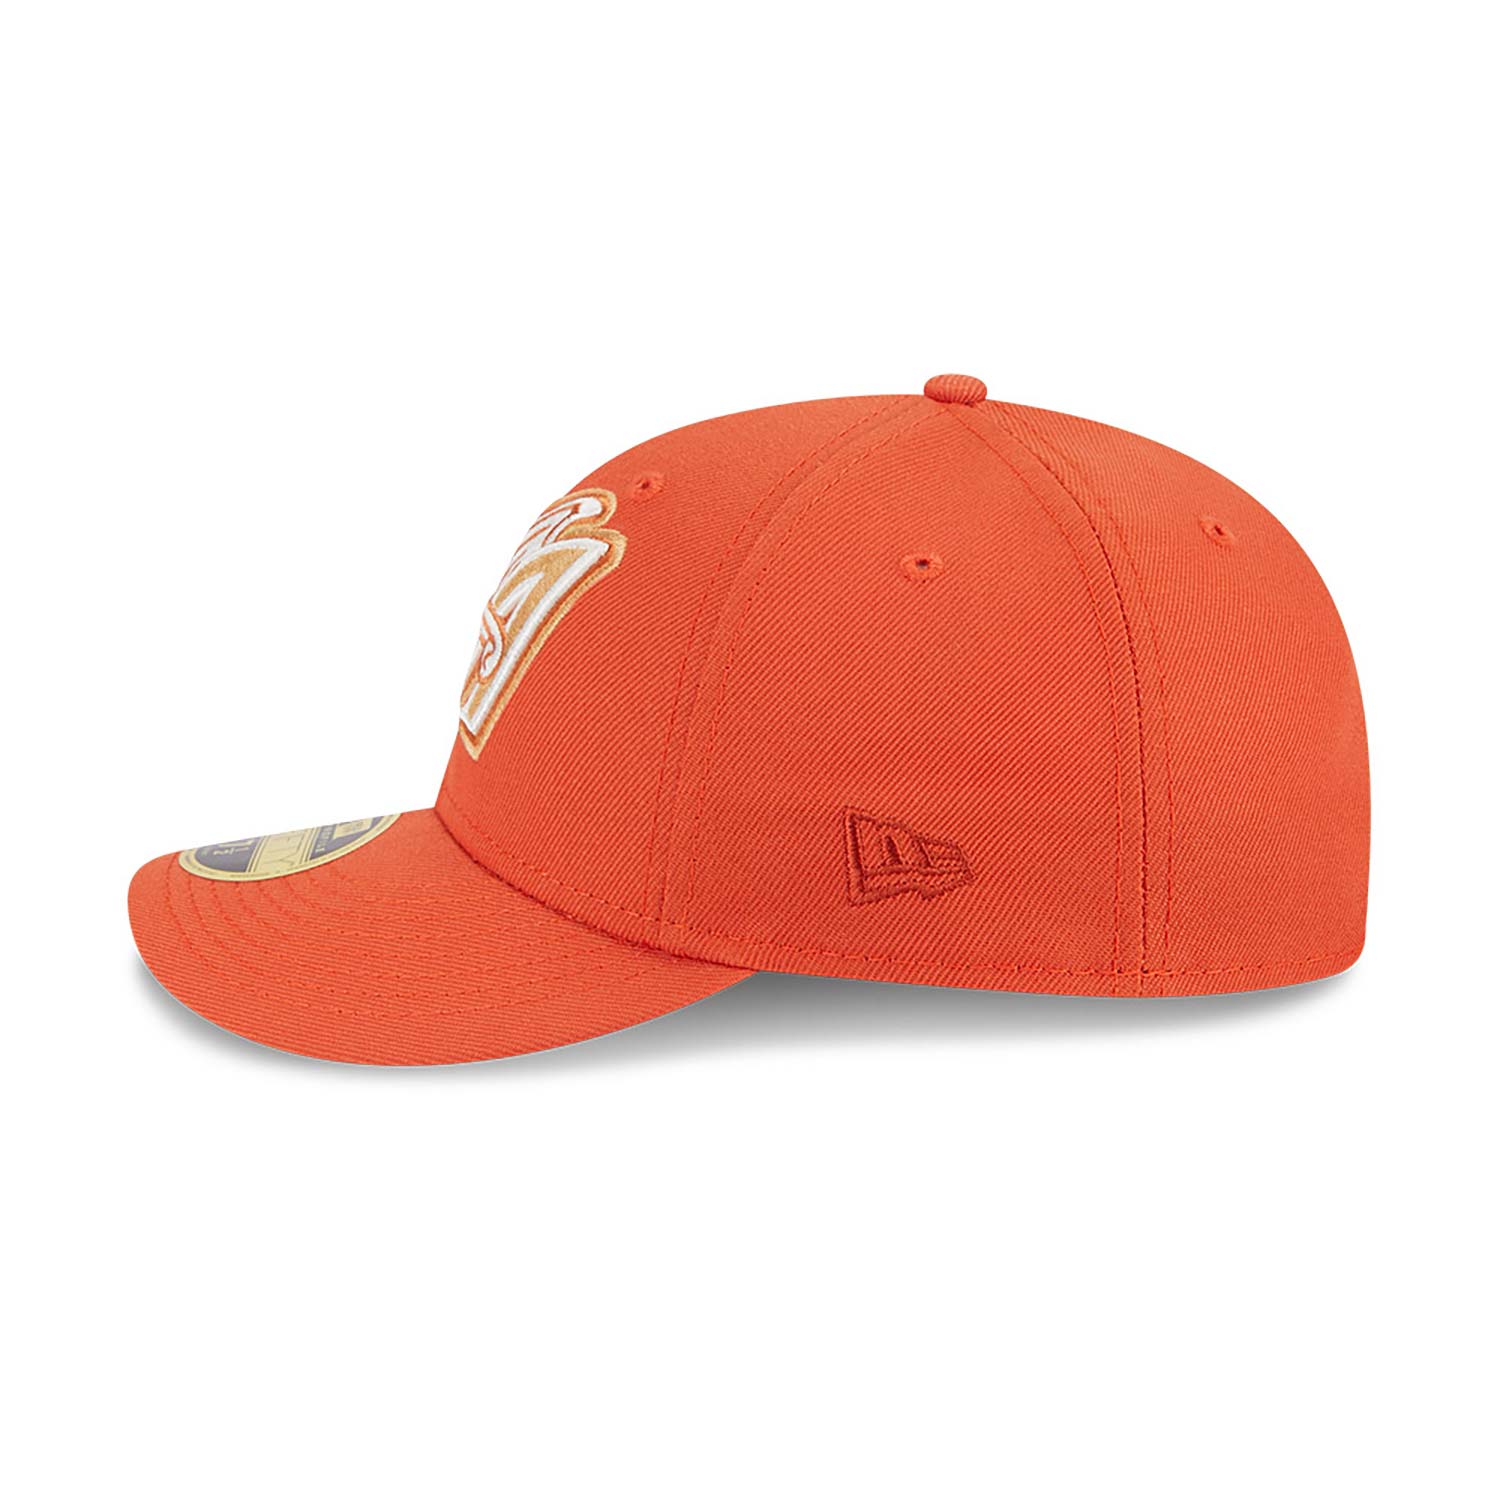 Anaheim Angels Repreve Orange Low Profile 59FIFTY Fitted Cap